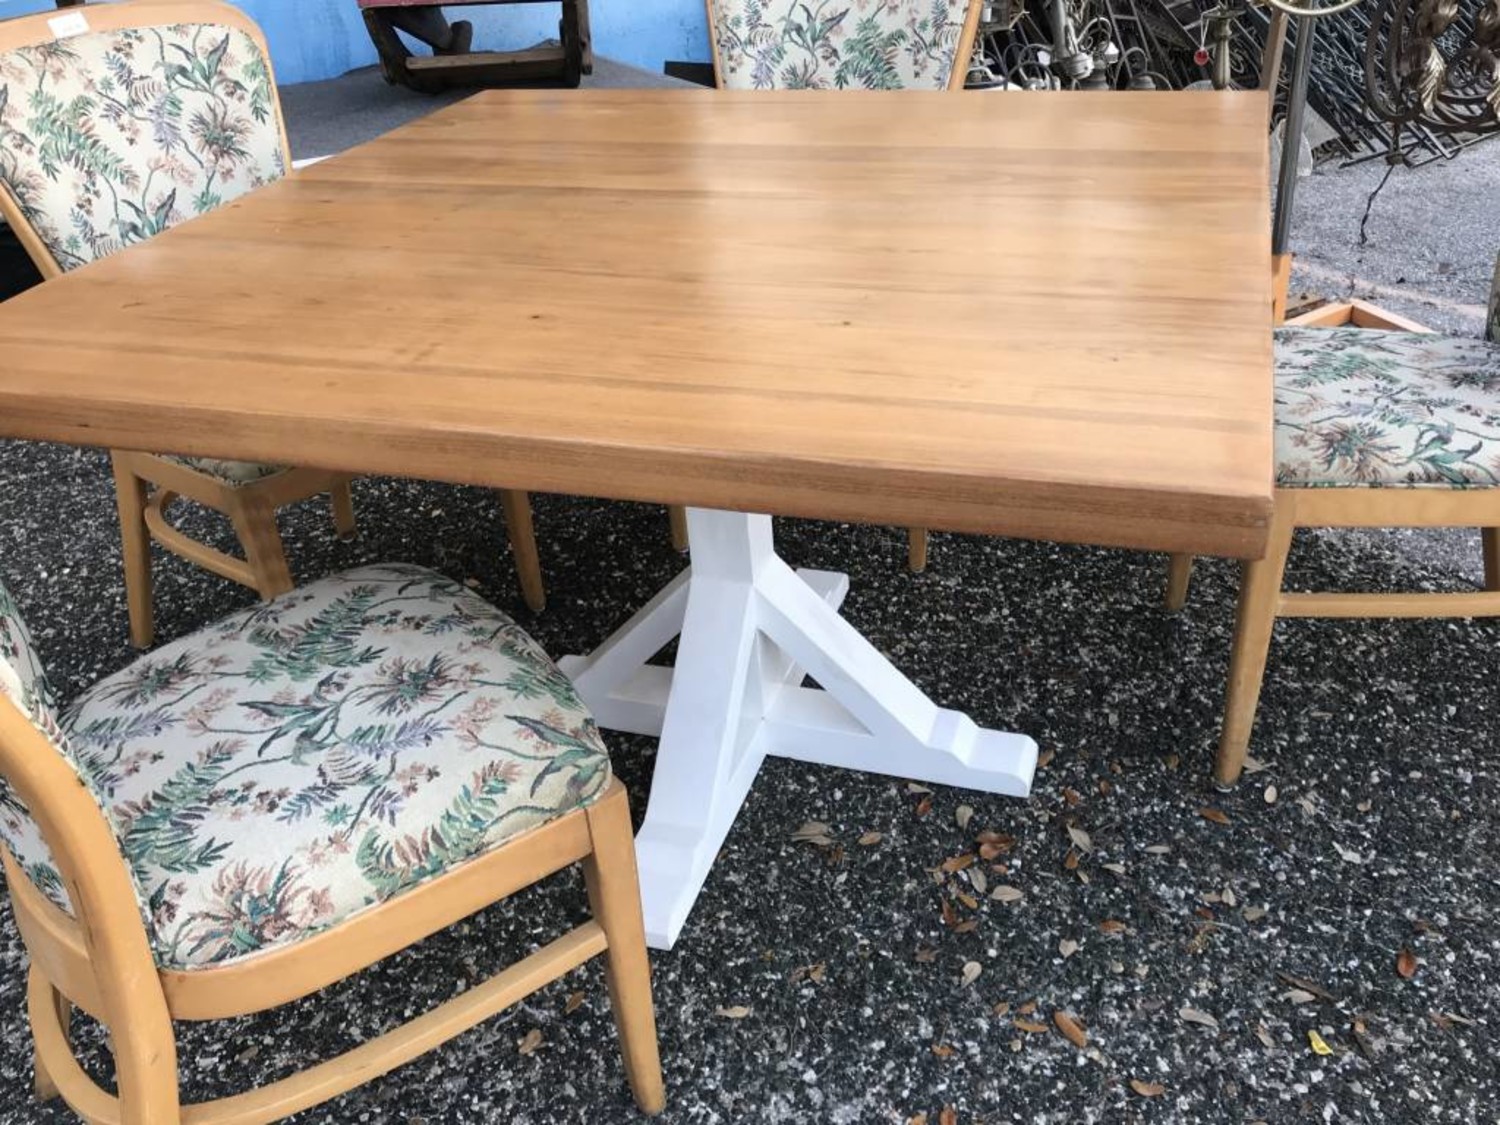 Cypress Square Table Sarasota Architectural Salvage 1093